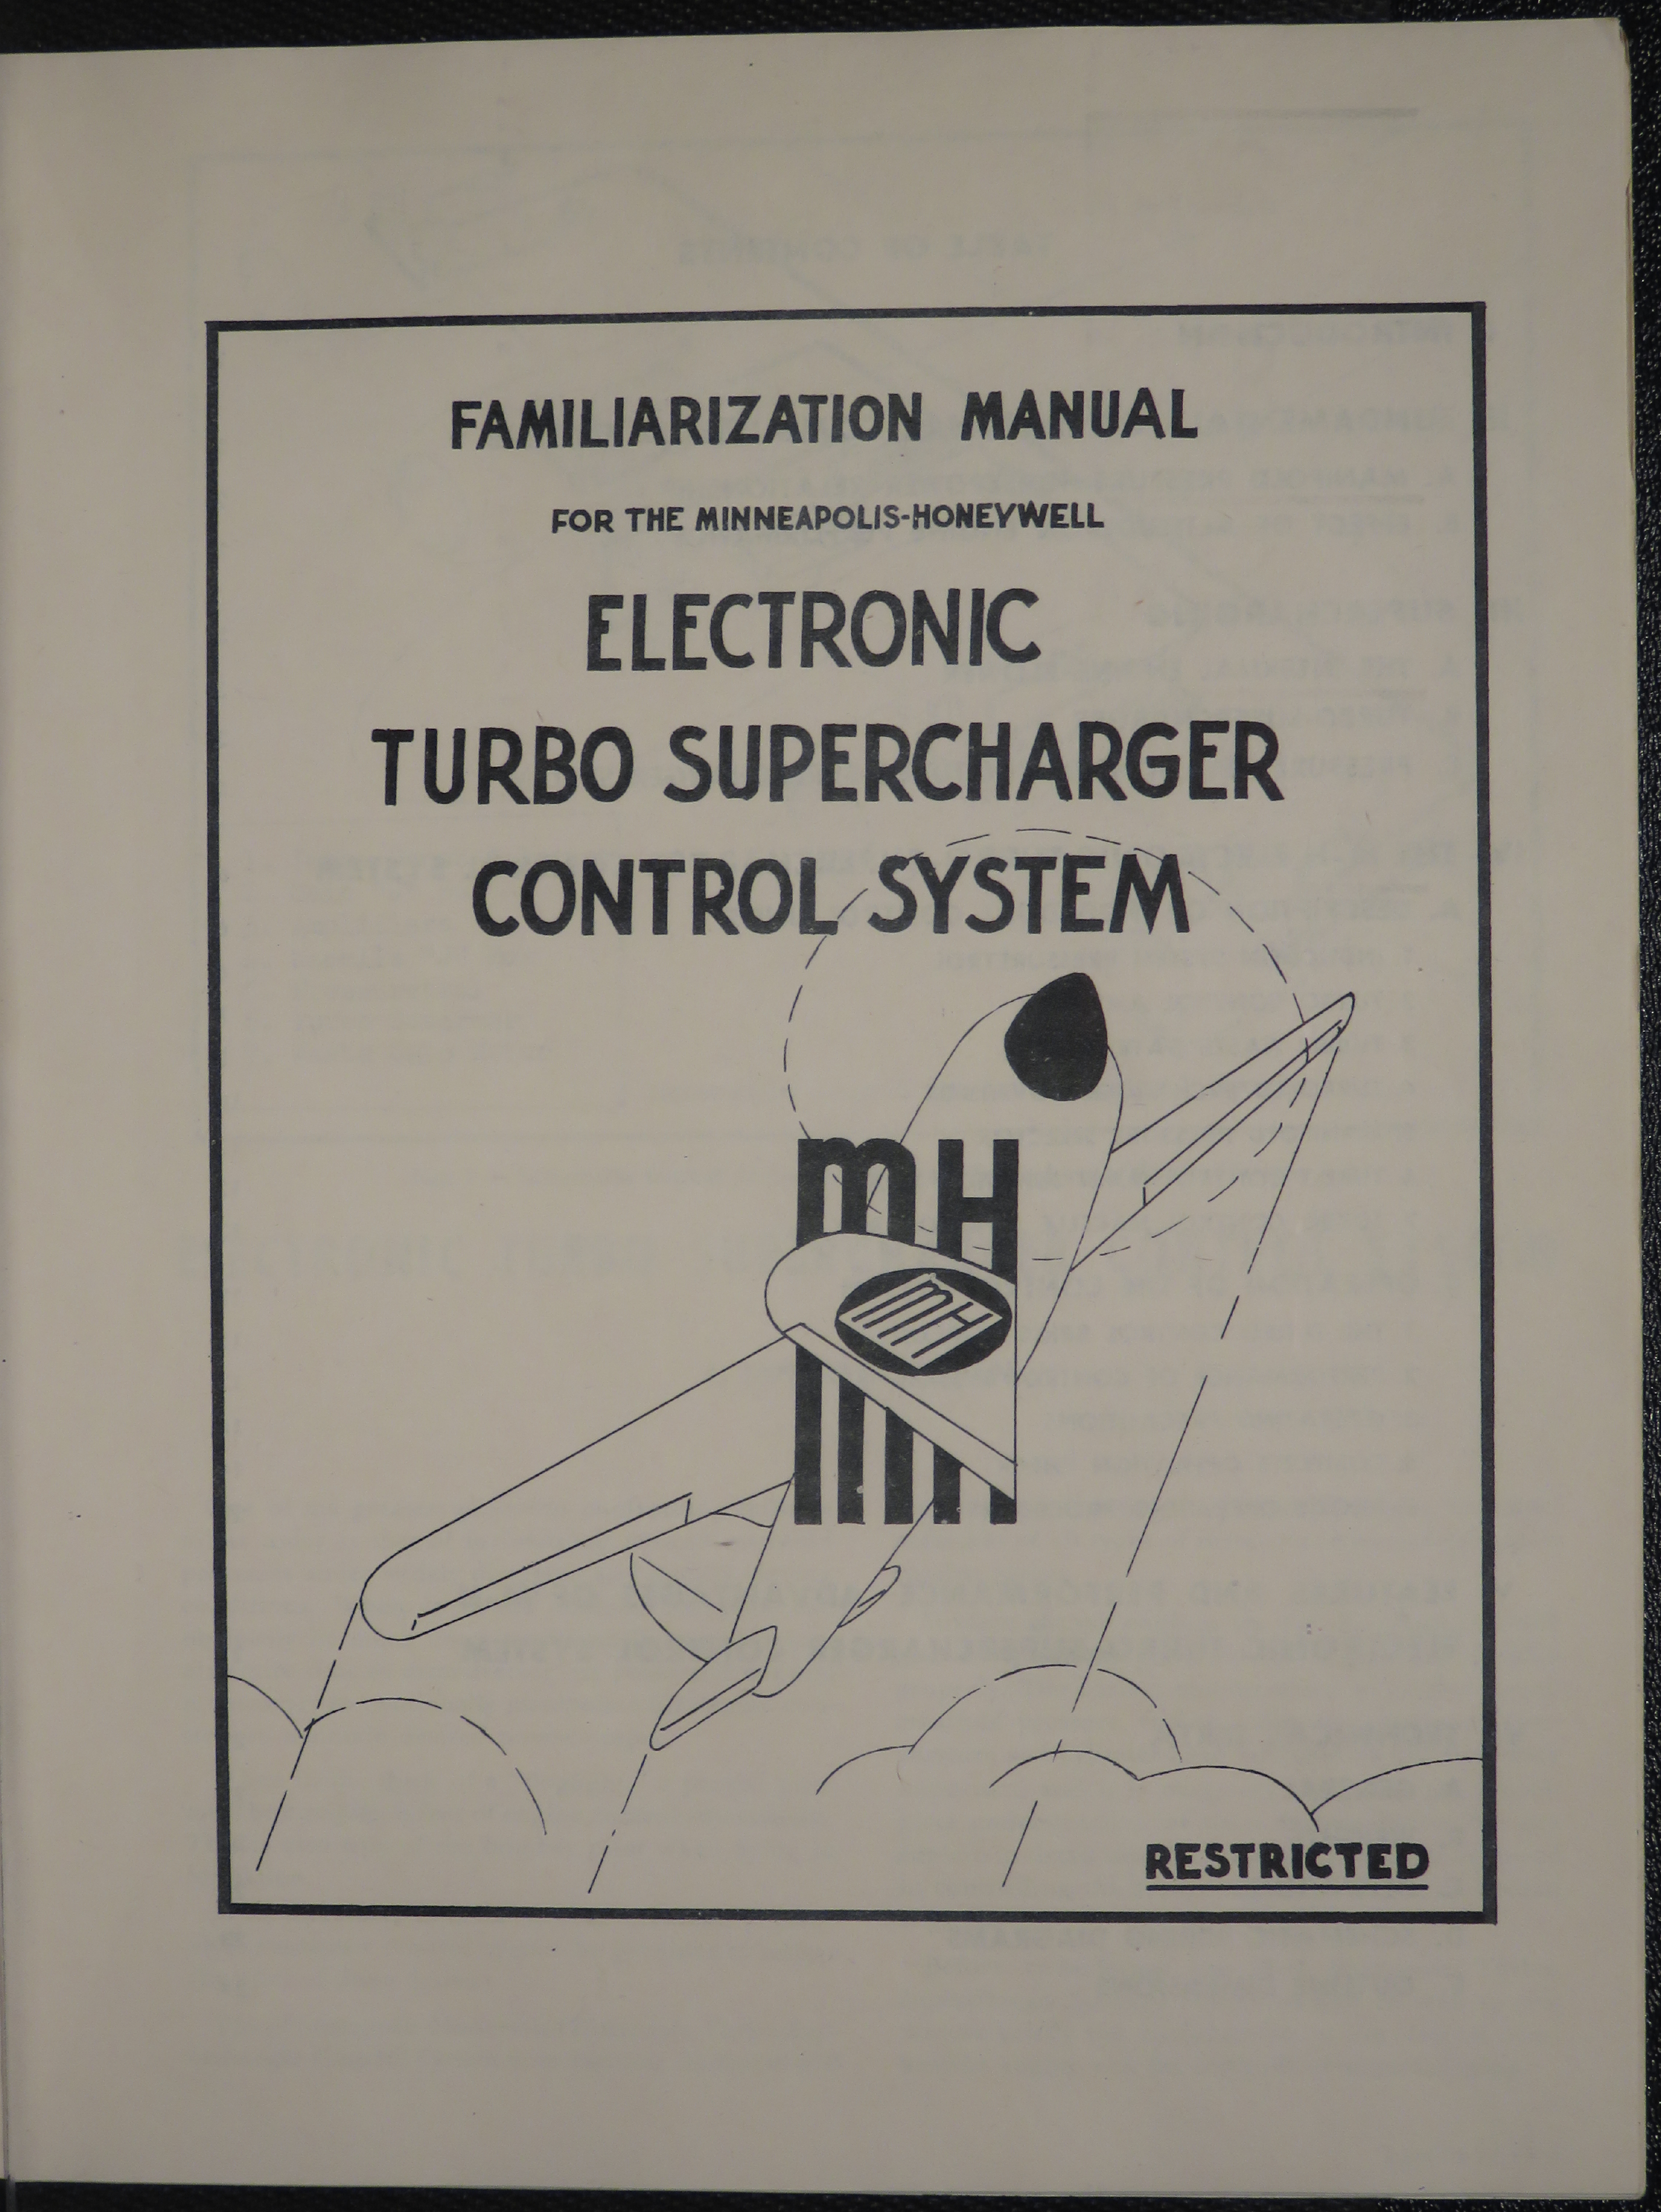 Sample page 5 from AirCorps Library document: Familiarization Manual for Electronic Turbosupercharger Control System